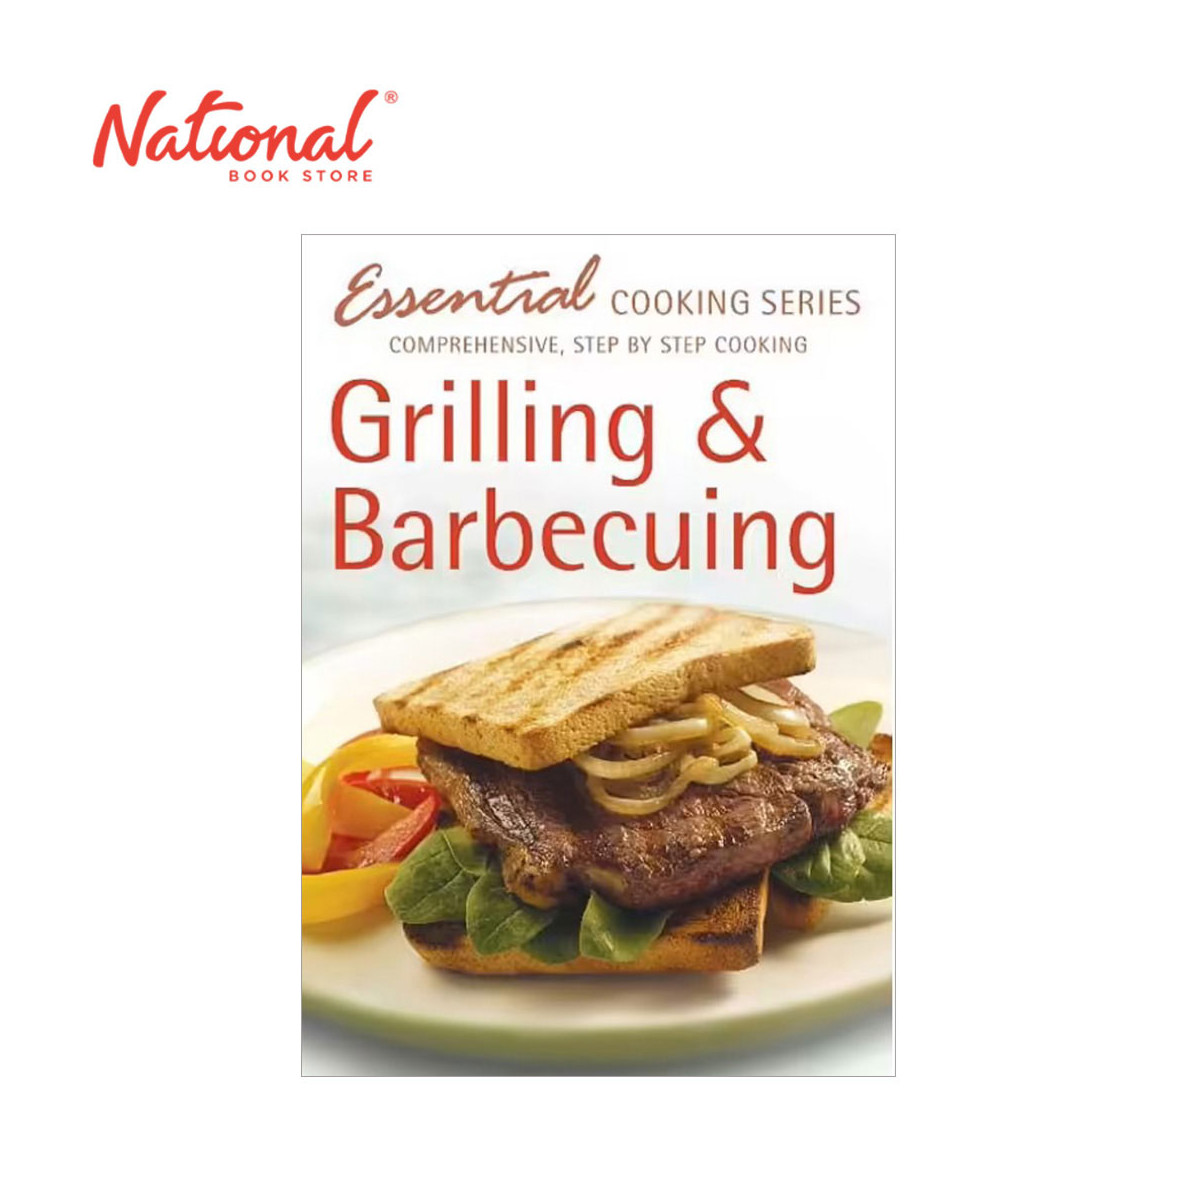 Essential Cooking: Grilling and Barbecuing by Hinkler - Trade Paperback - Cookbook